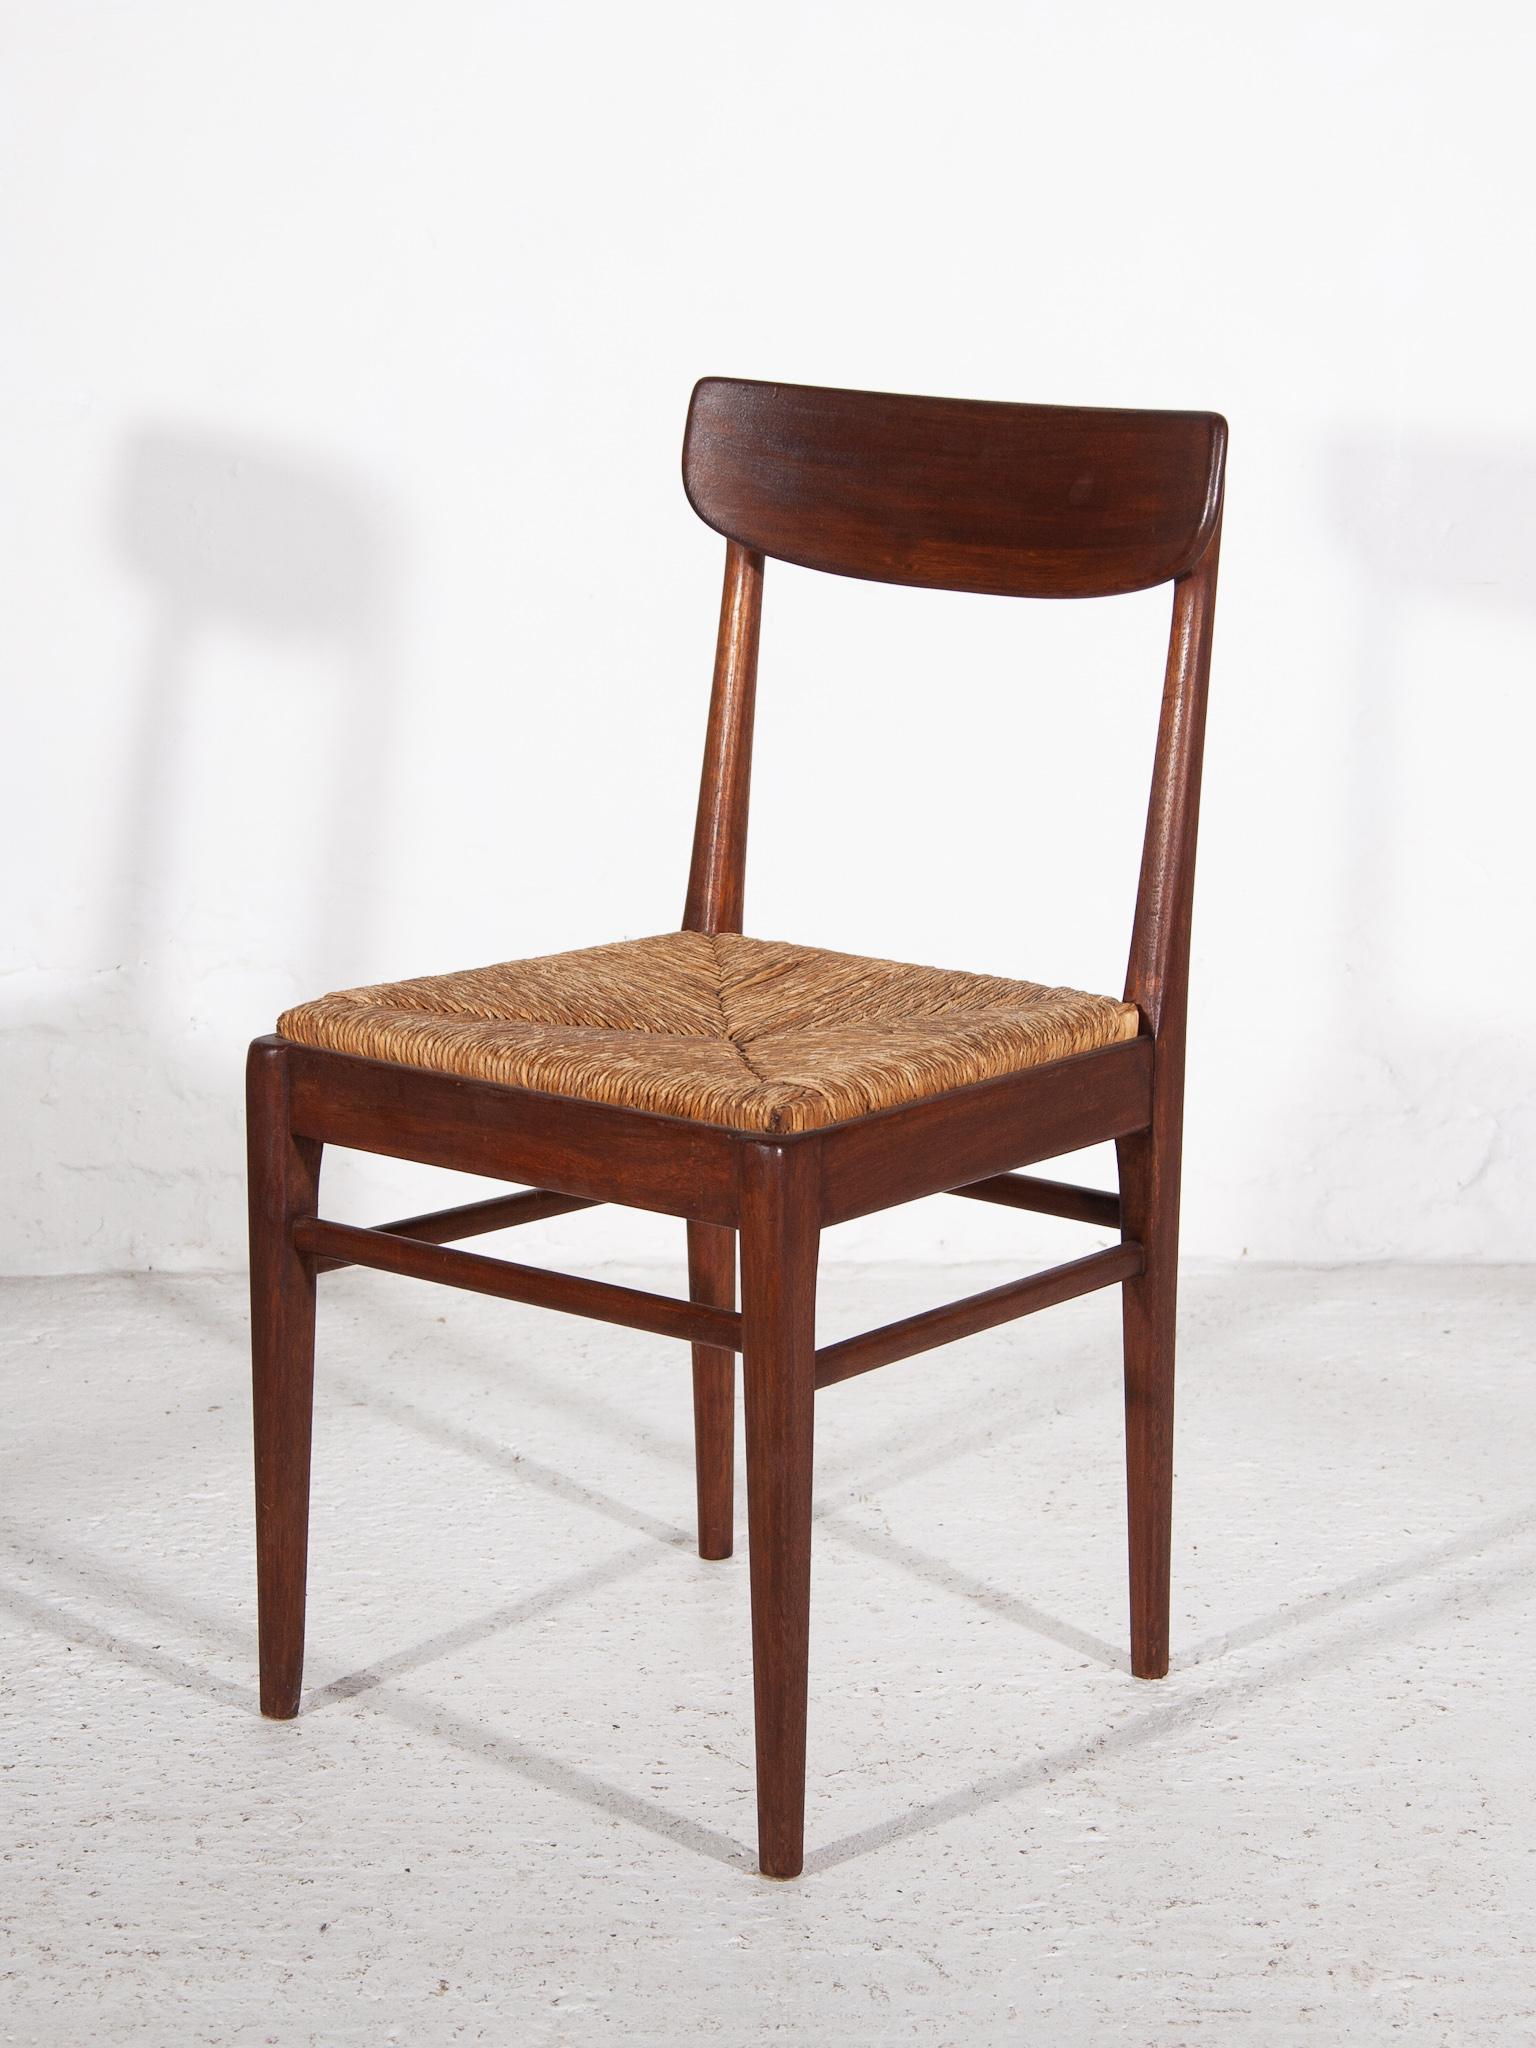 Belgian Teak Dining Chairs with Rattan Sea, t 1959, Belgium For Sale